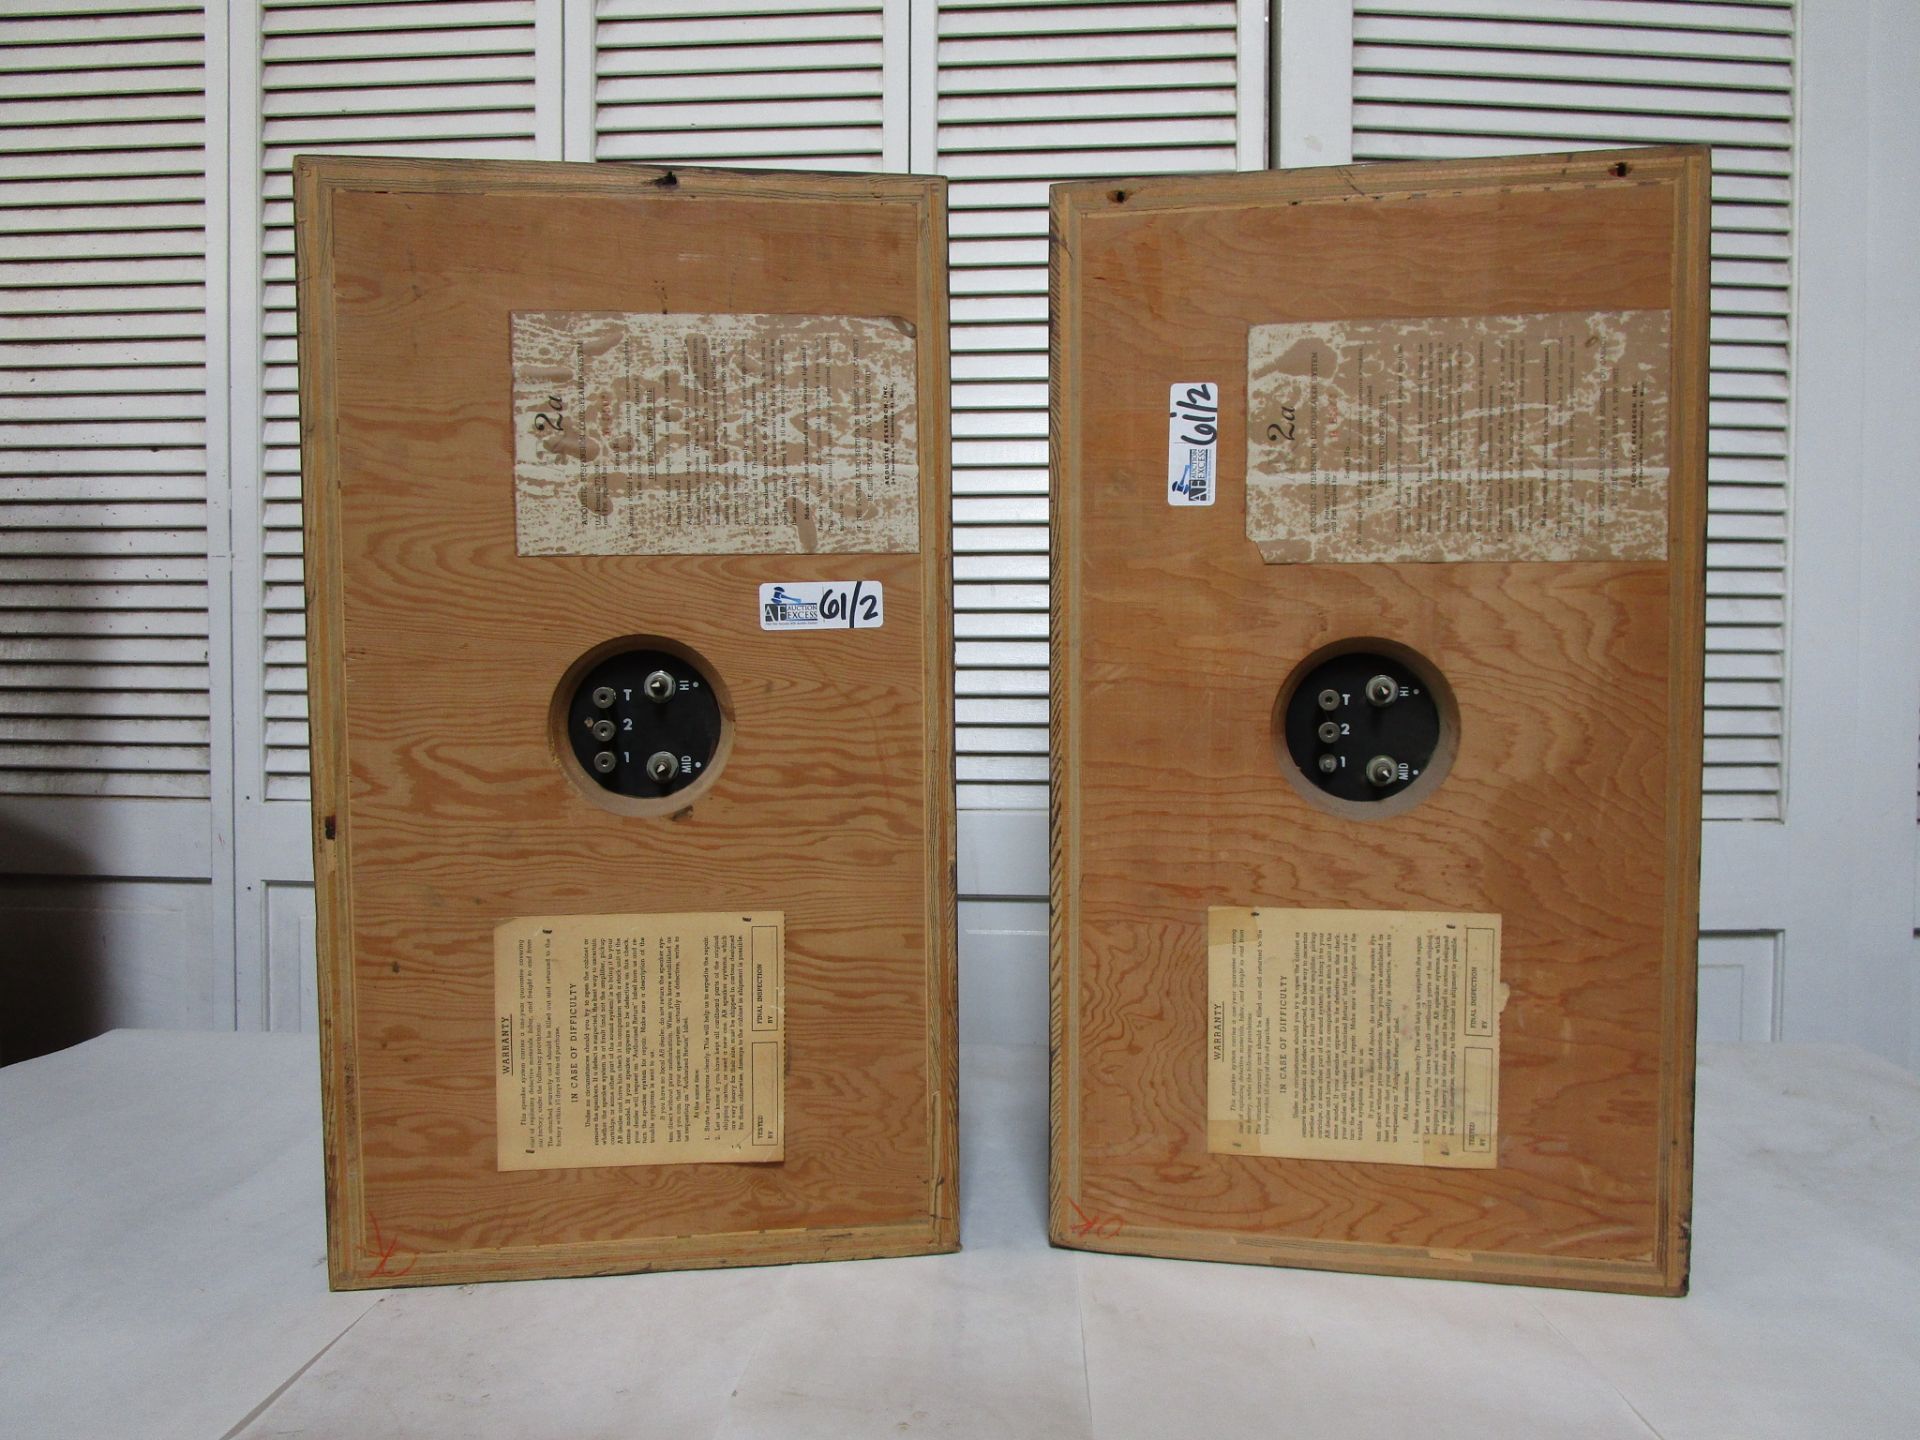 2 AR ACOUSTIC RESEARCH AR-2A SPEAKERS - Image 2 of 3